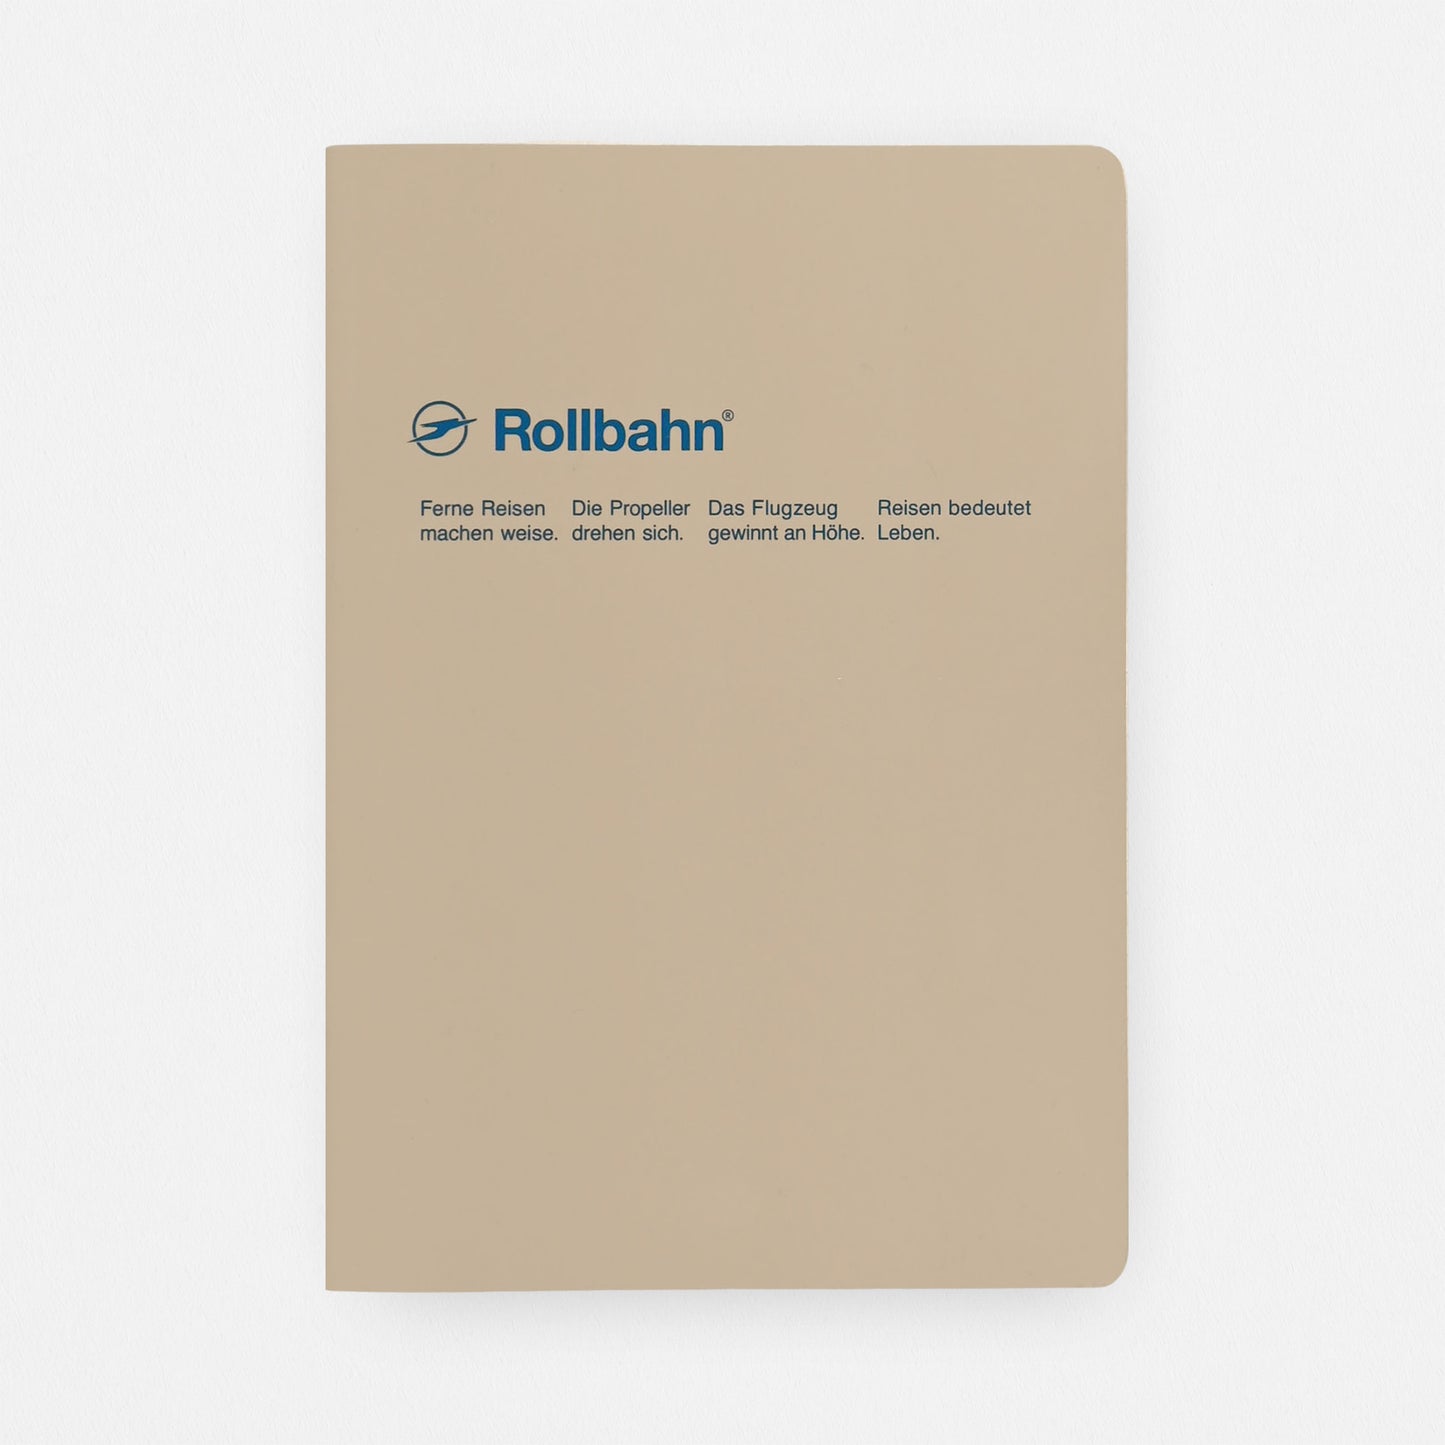 Delfonics Rollbahn "Note" Notebook Pocket, Large, A5 Or Extra Large  | 10 Colors Greige / Pocket A6 ( 4 x 6")